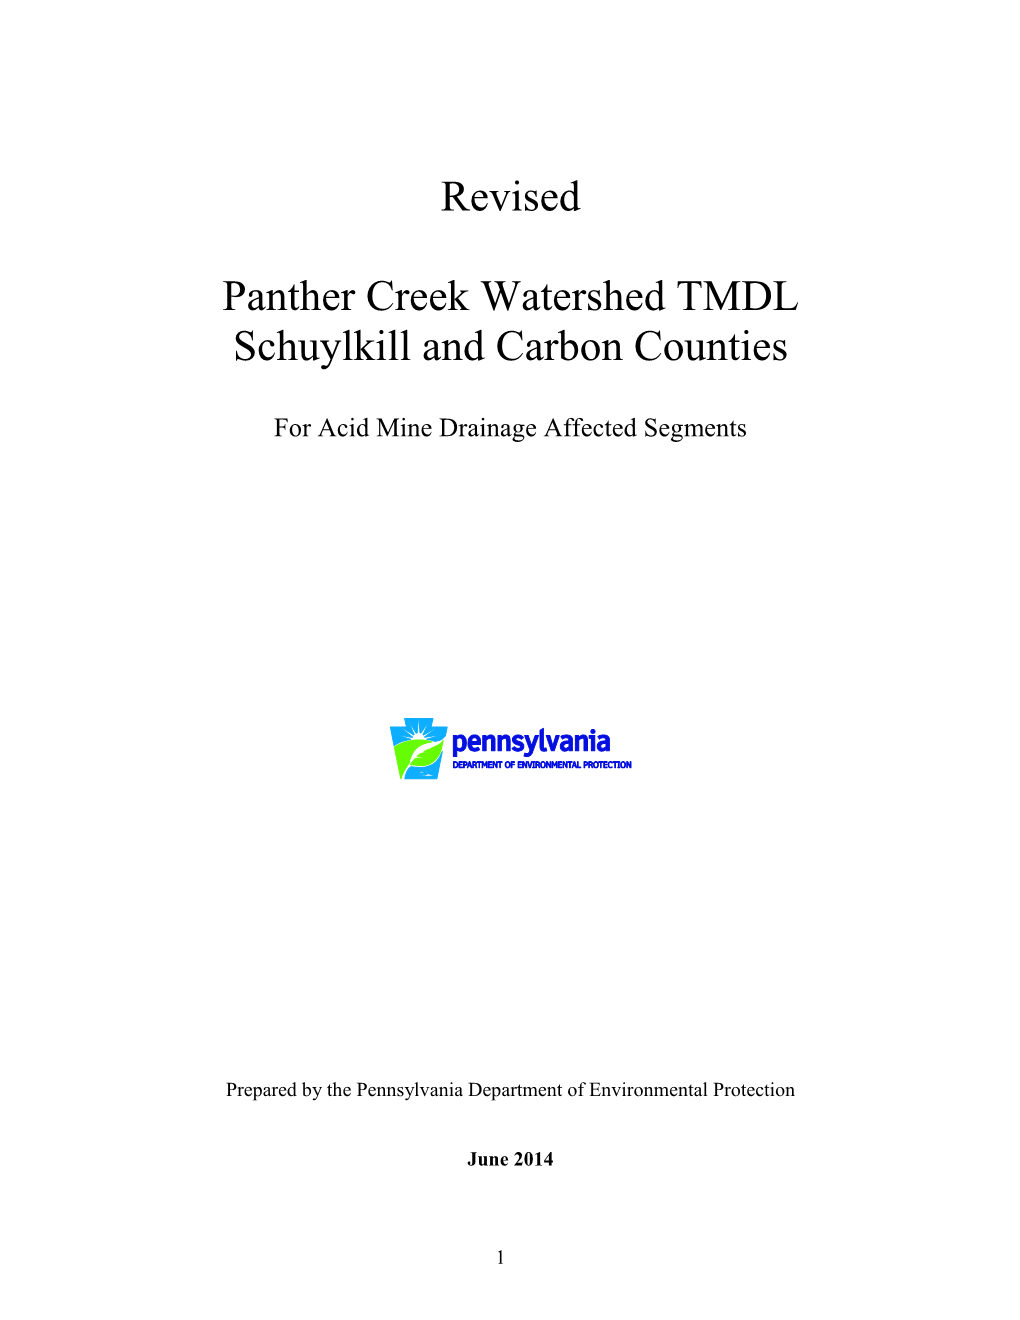 Revised Panther Creek Watershed TMDL Schuylkill and Carbon